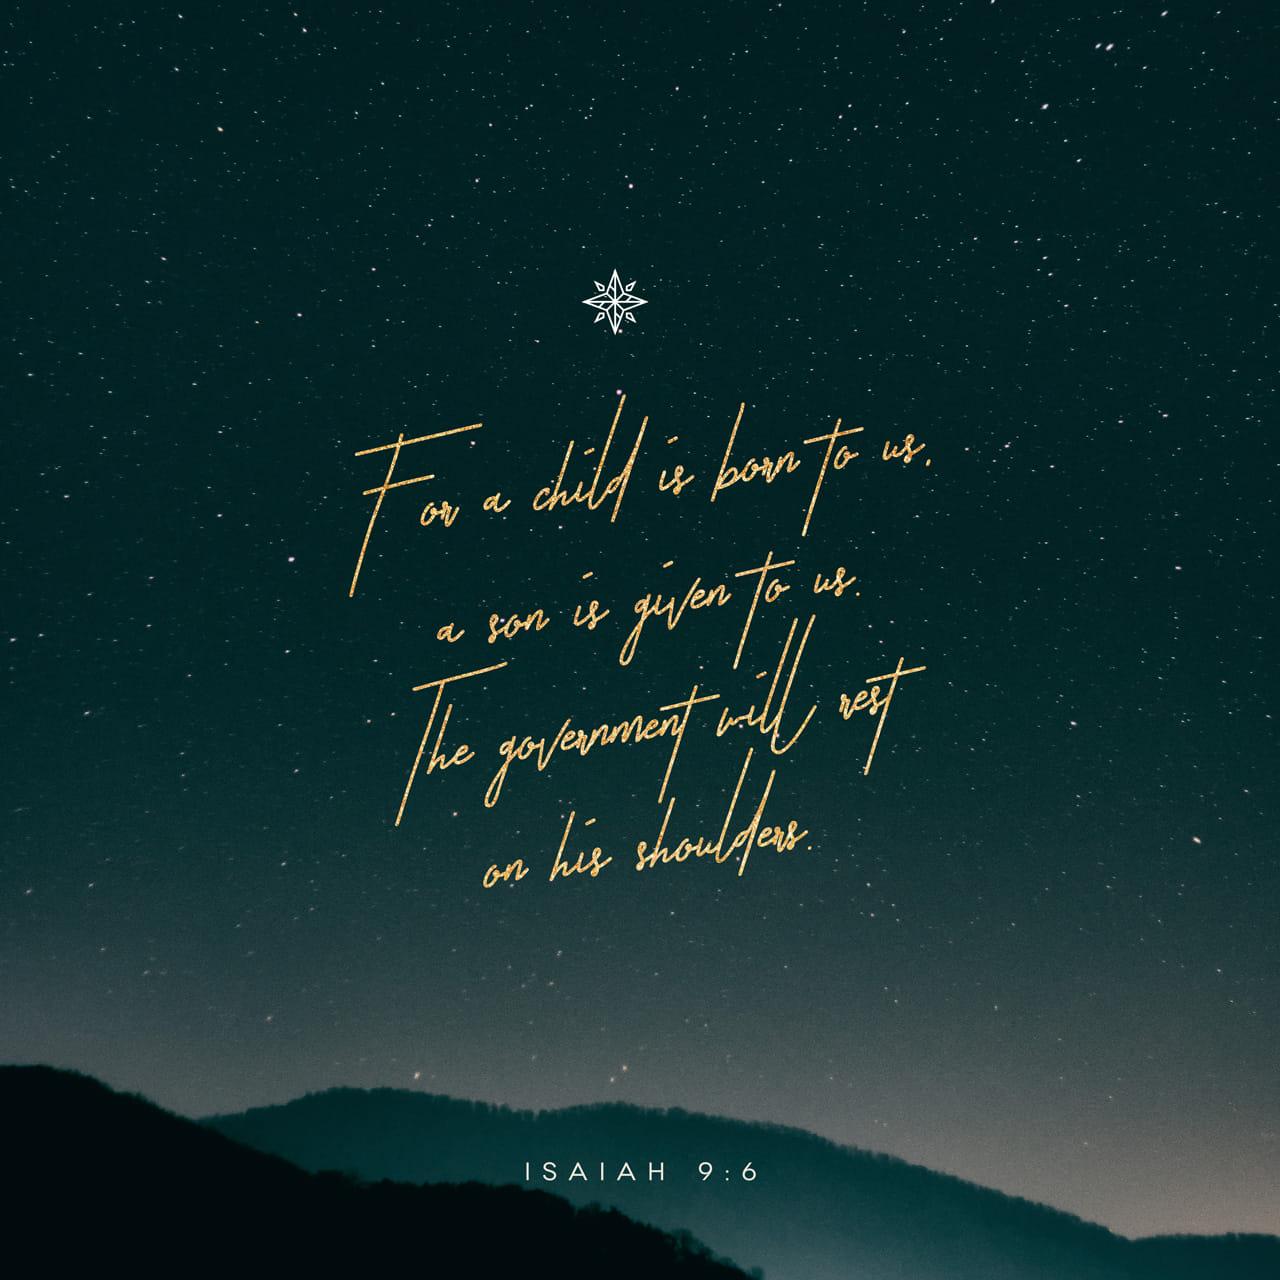 Bible Verse of the Day - day 83 - image 28519 (Isaiah 9:1-7)